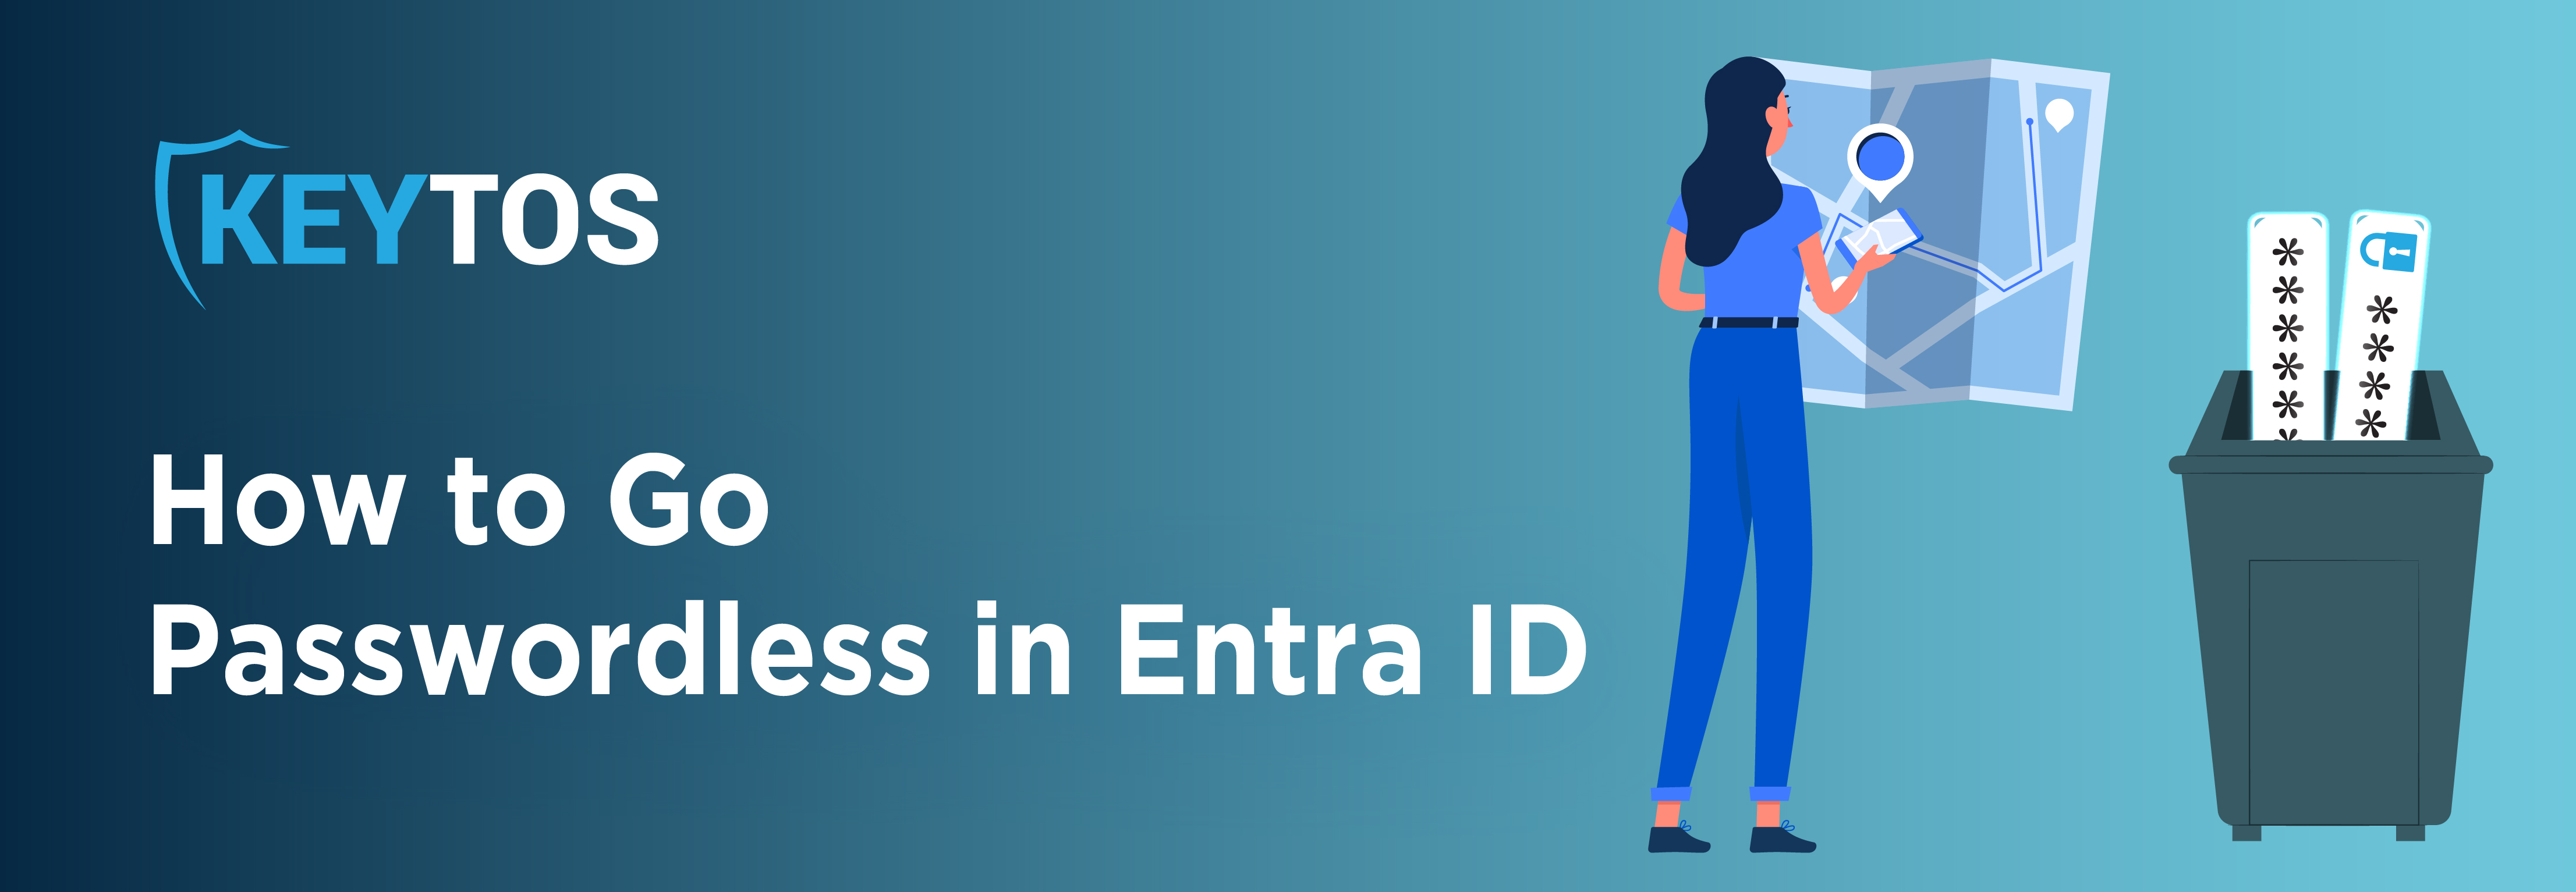 How to go passwordless in Entra ID